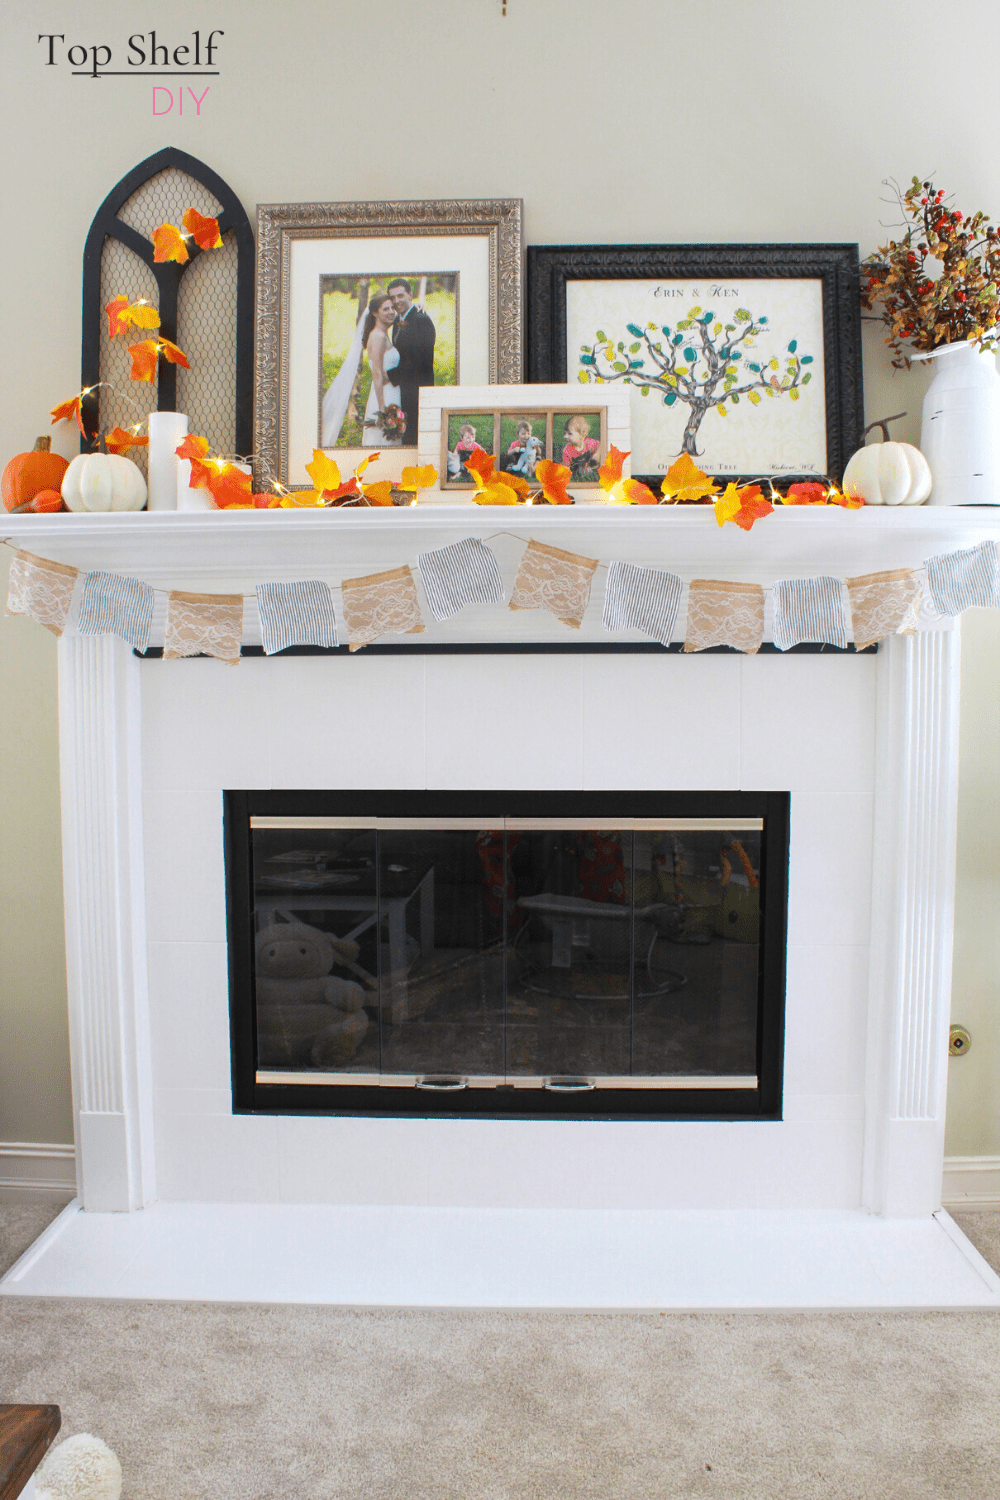 Upgrade your 90s marble fireplace with a little paint to get the most bang for your buck! Get your mantel holiday-ready following this simple decorating tutorial.  #Marblefireplace
#Fireplace makeover #Fireplace design #Modern fireplace #Seasonalmanteldécor